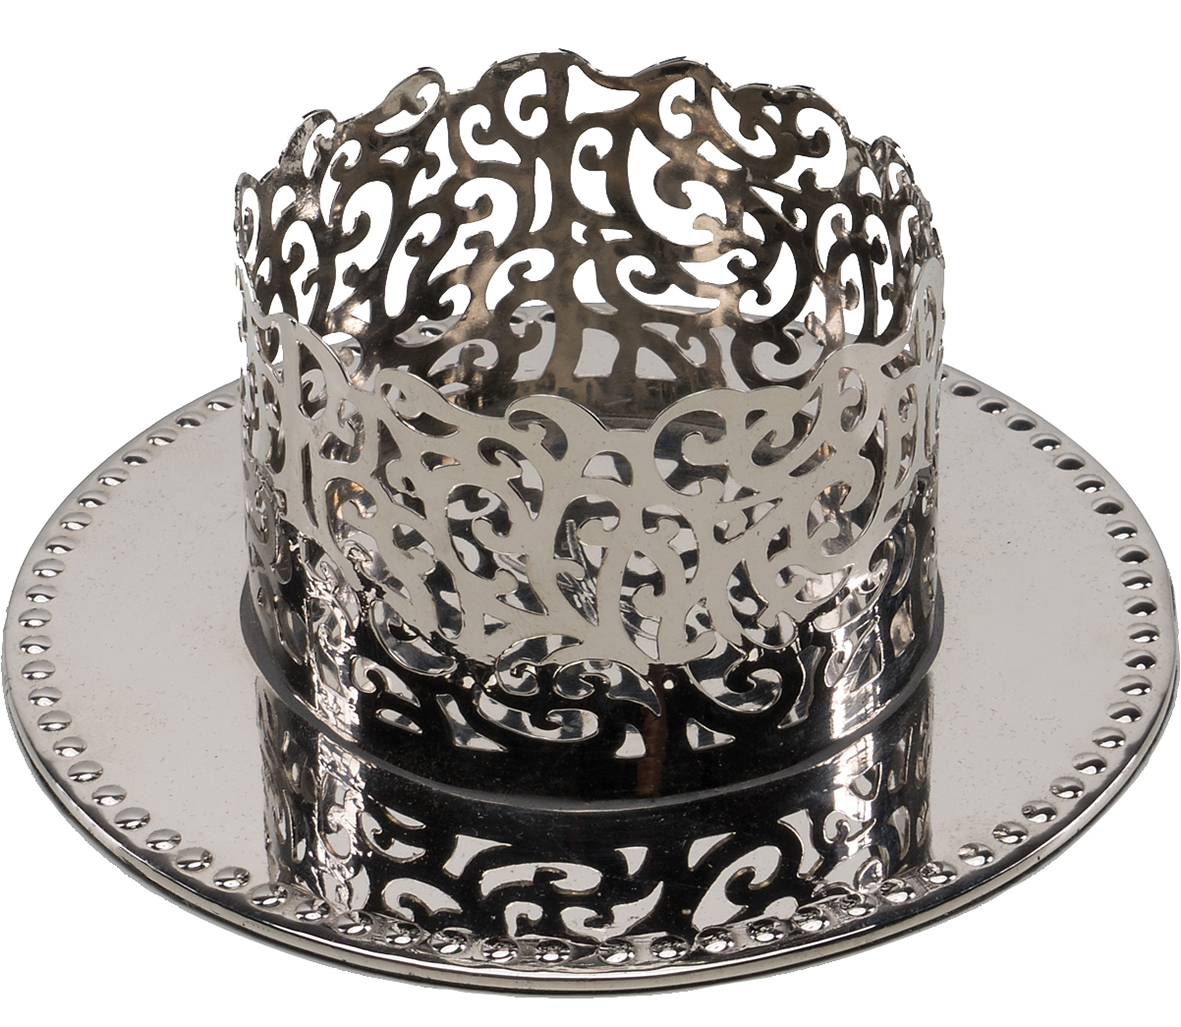 Candle Holder made of Nickel-Plated Brass Fine Ornamentation